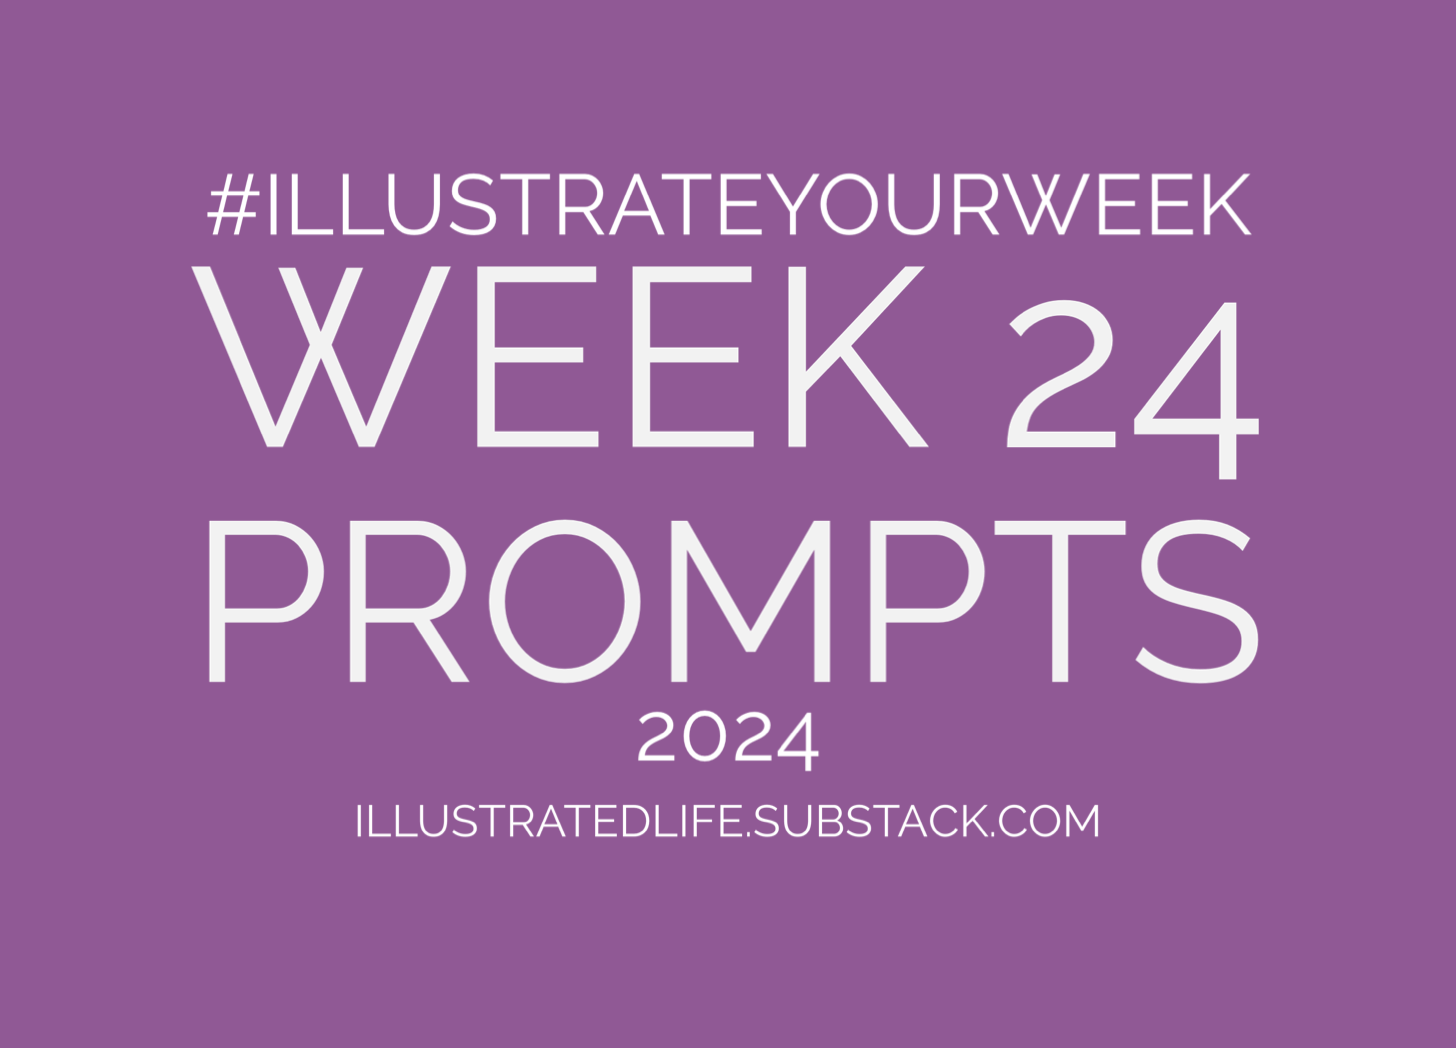 Week 24 Prompts for Illustrate Your Week 2024